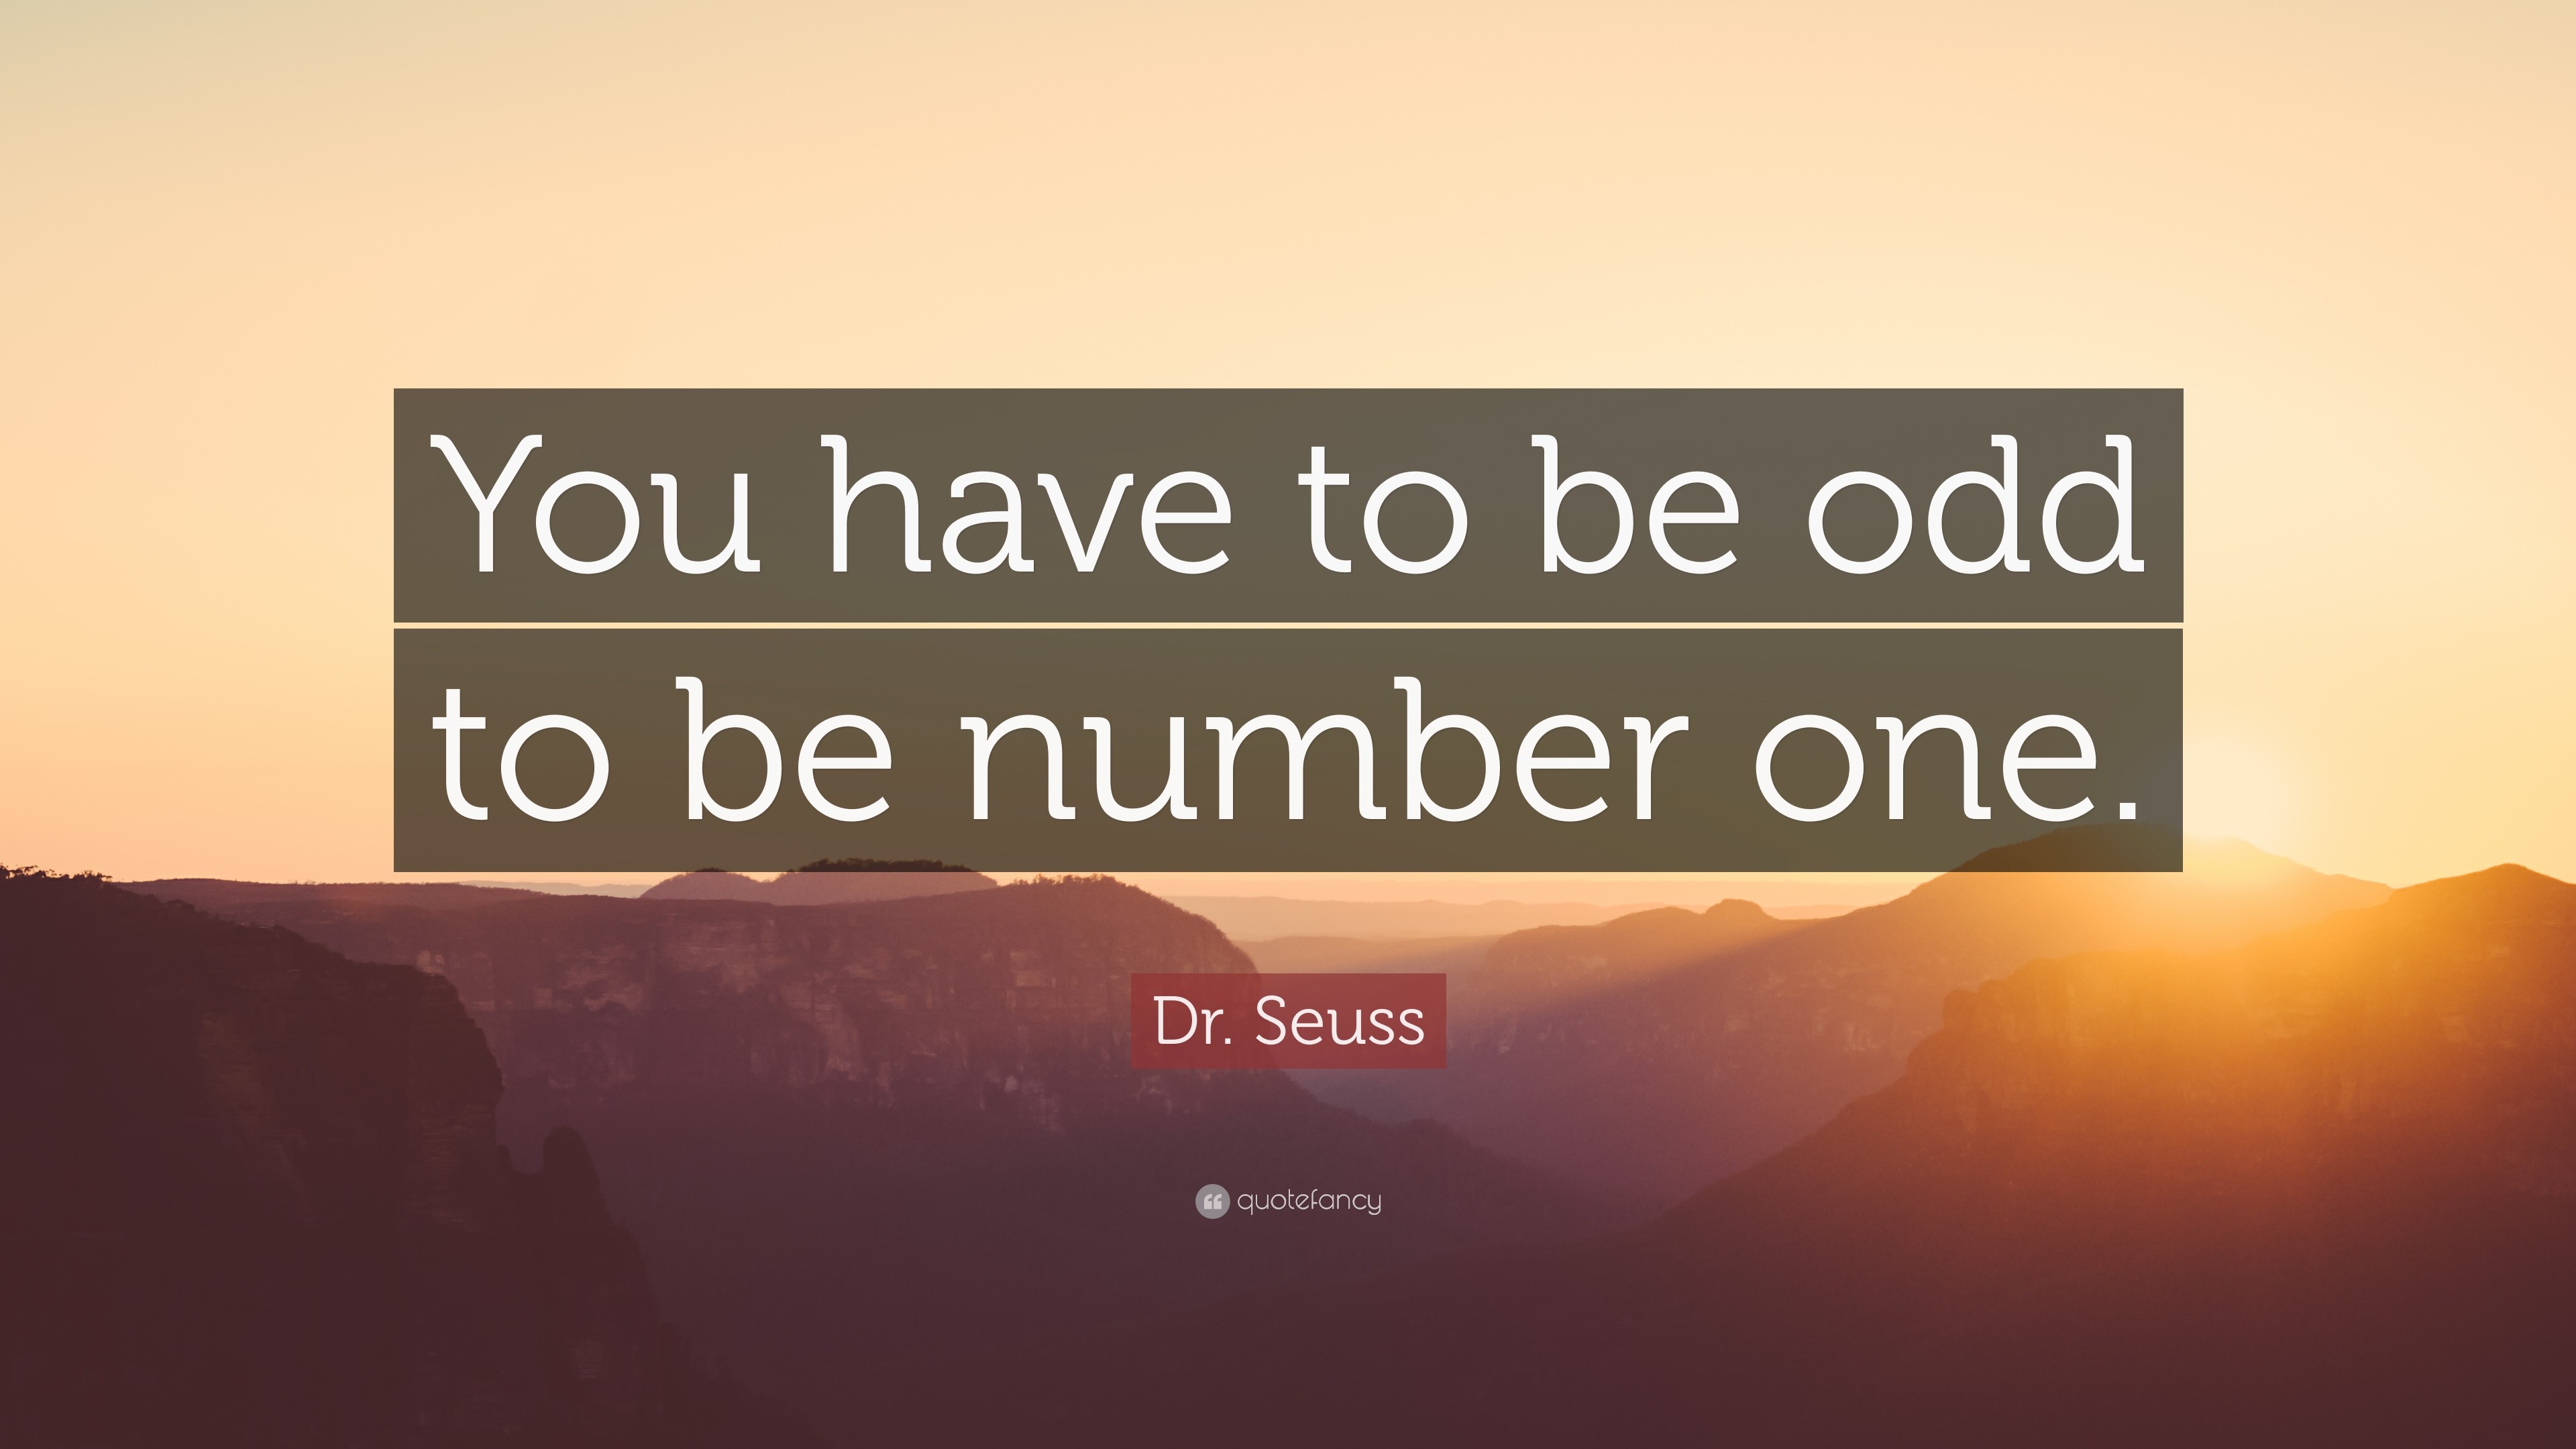 3840x2160 Dr. Seuss Quote: “You have to be odd to be number one.